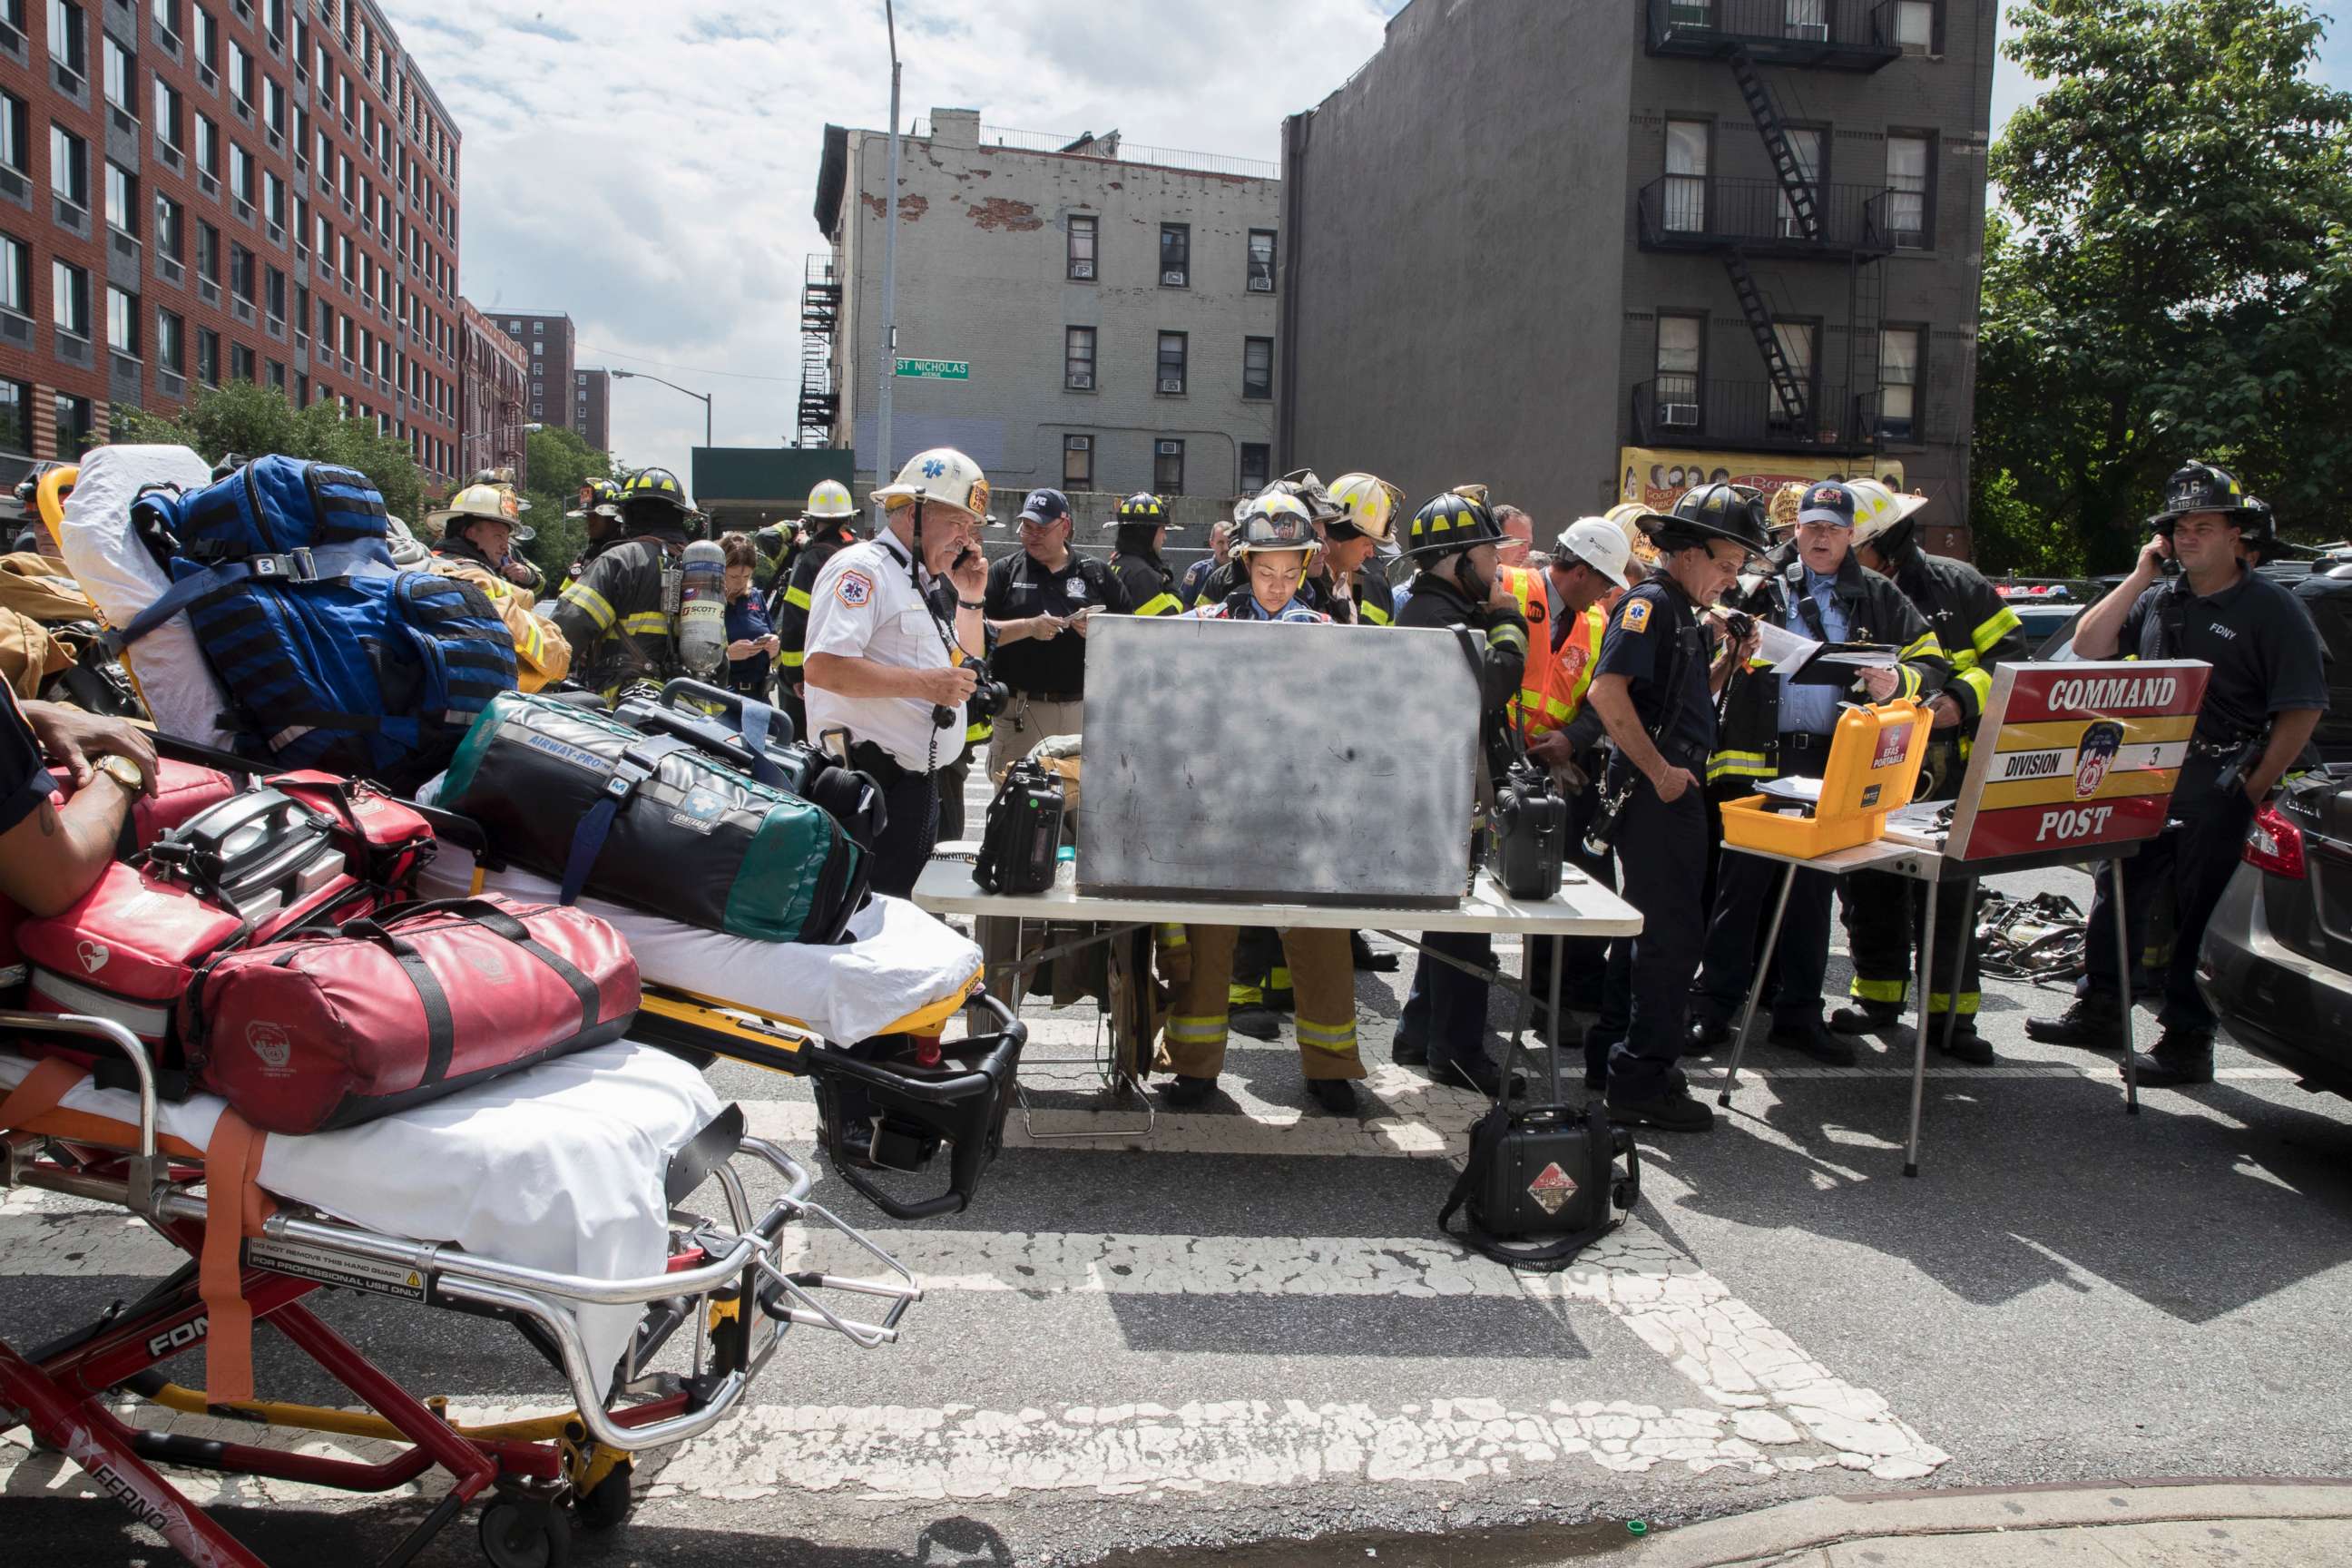 PHOTO: Emergency service personnel work at the scene of a subway derailment, Tuesday, June 27, 2017, in the Harlem neighborhood of New York.